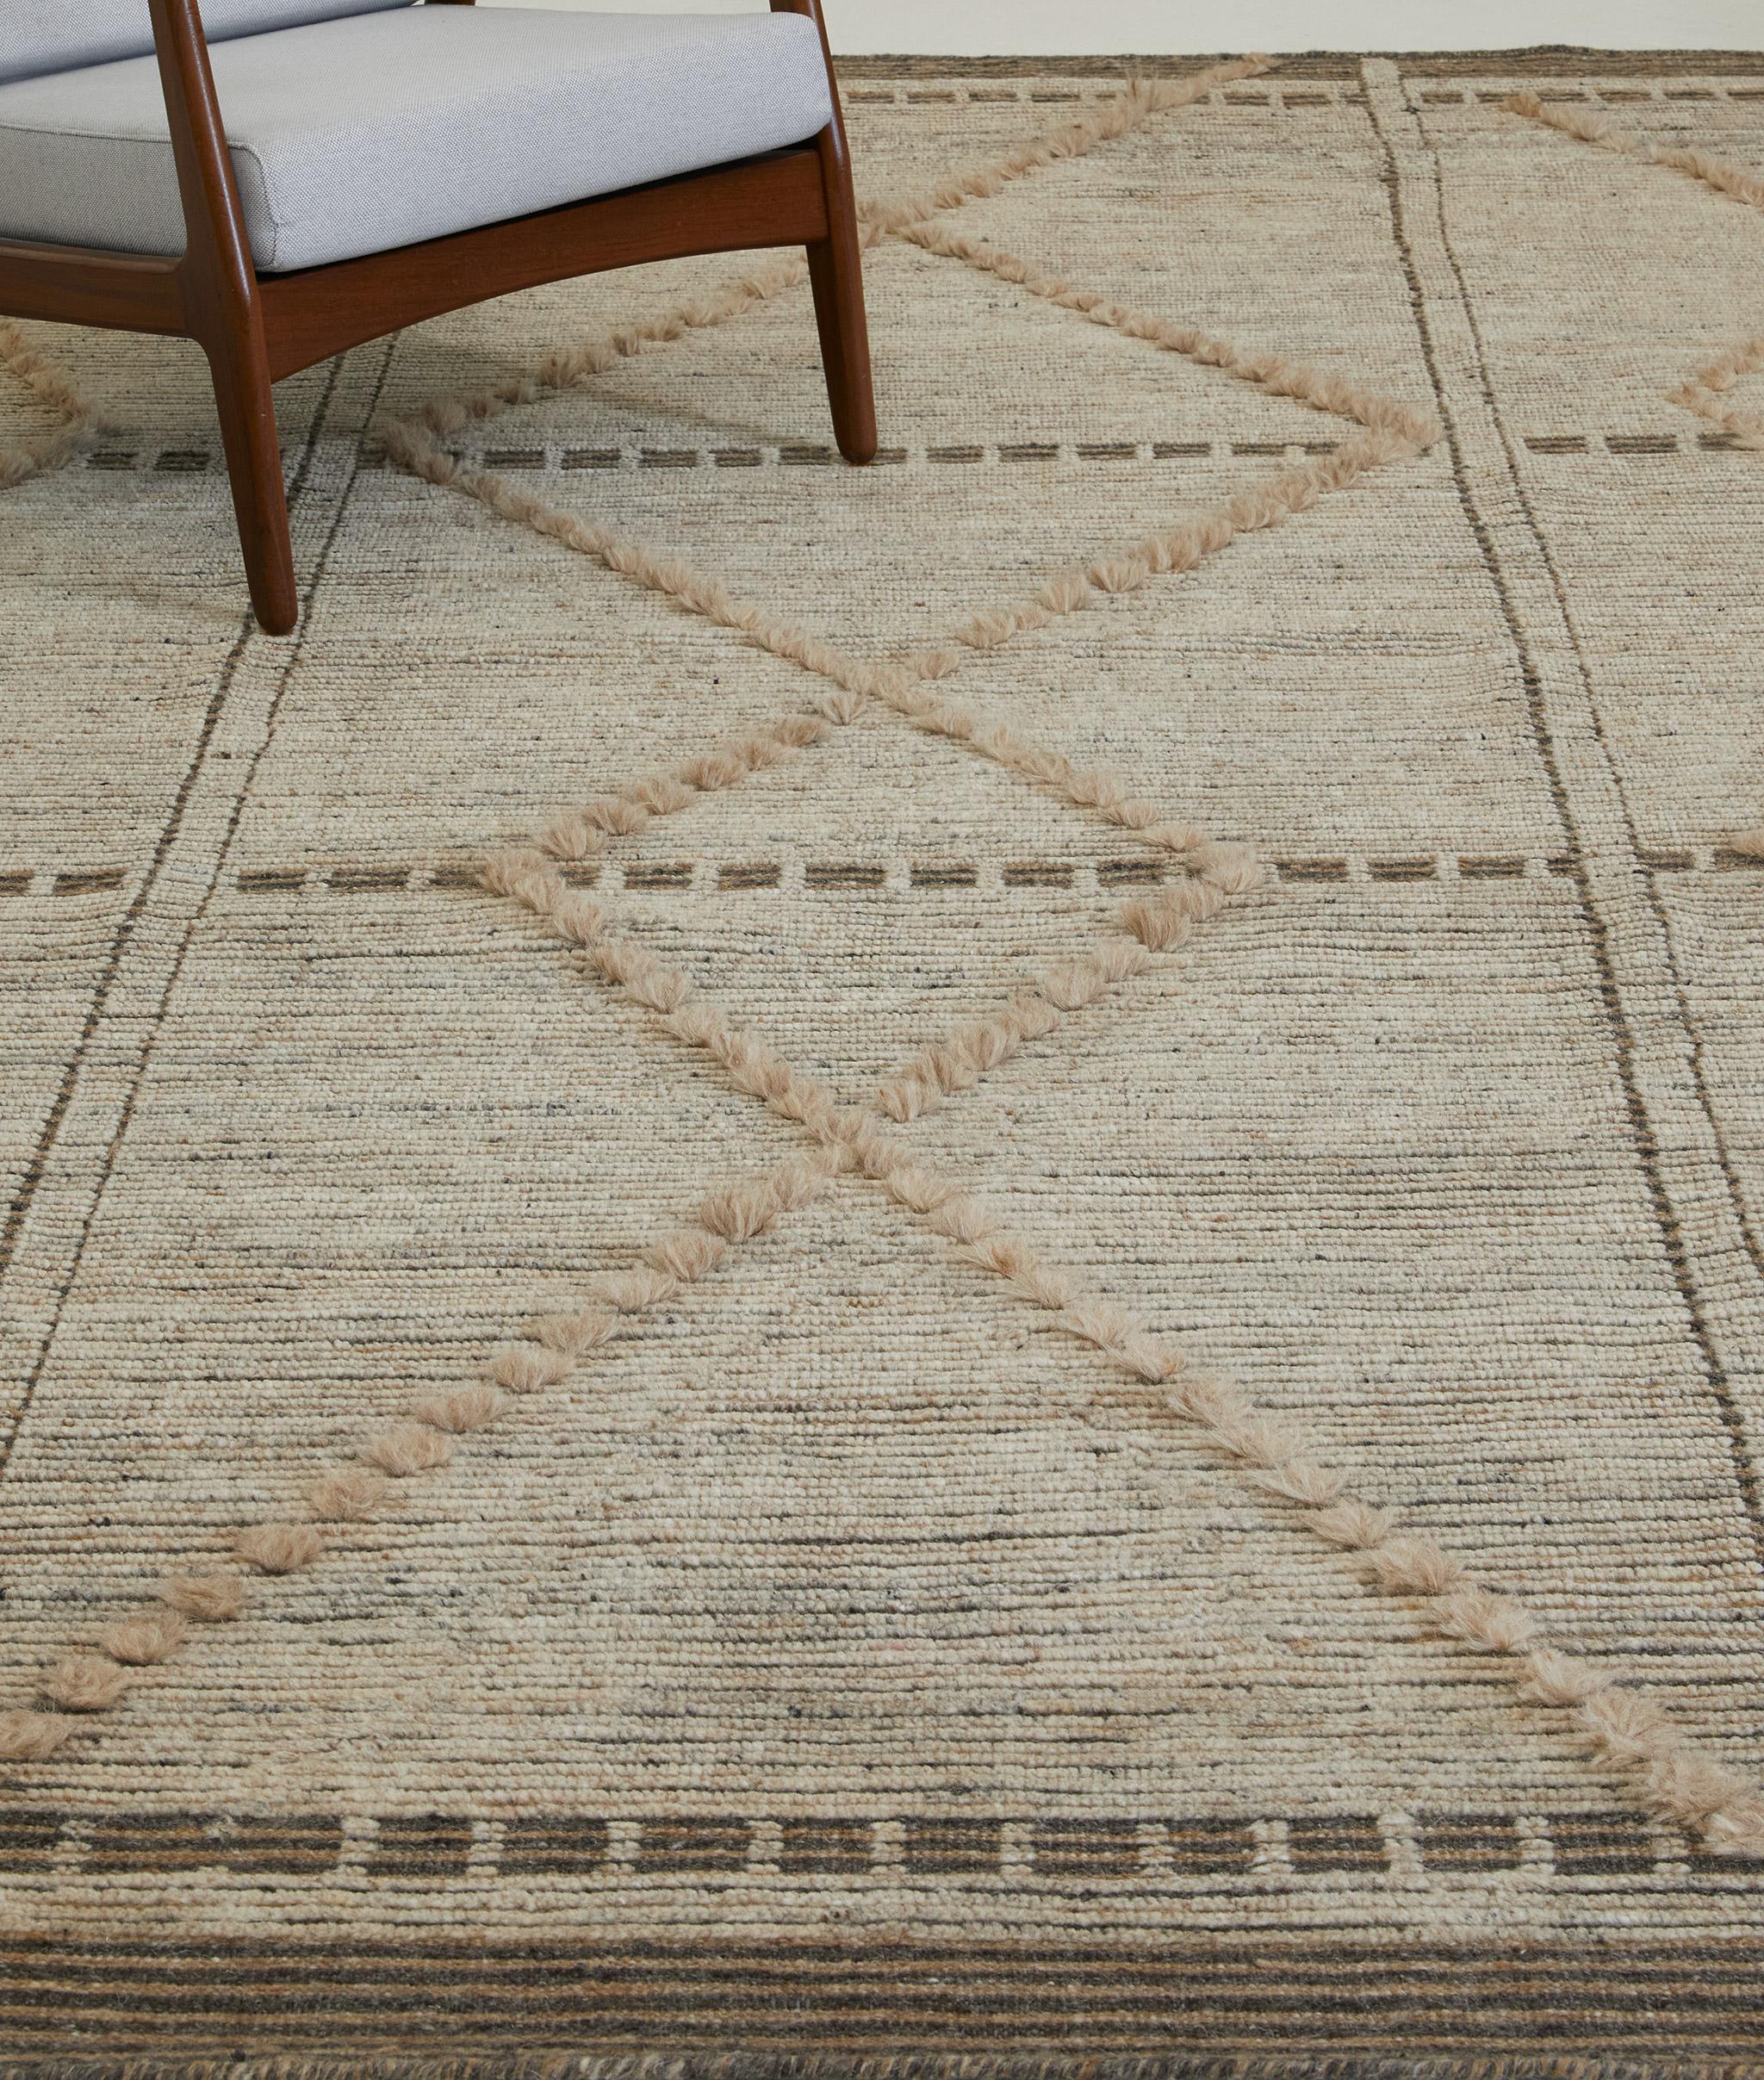 A Moroccan inspired design with formal resolve. Sangiovese's trim pile hosts a classic diamond trellis motif. Contrasting flatweave accents ground the composition.

Here in dappled clay.

The Estancia Collection by Mehraban is a group of casually